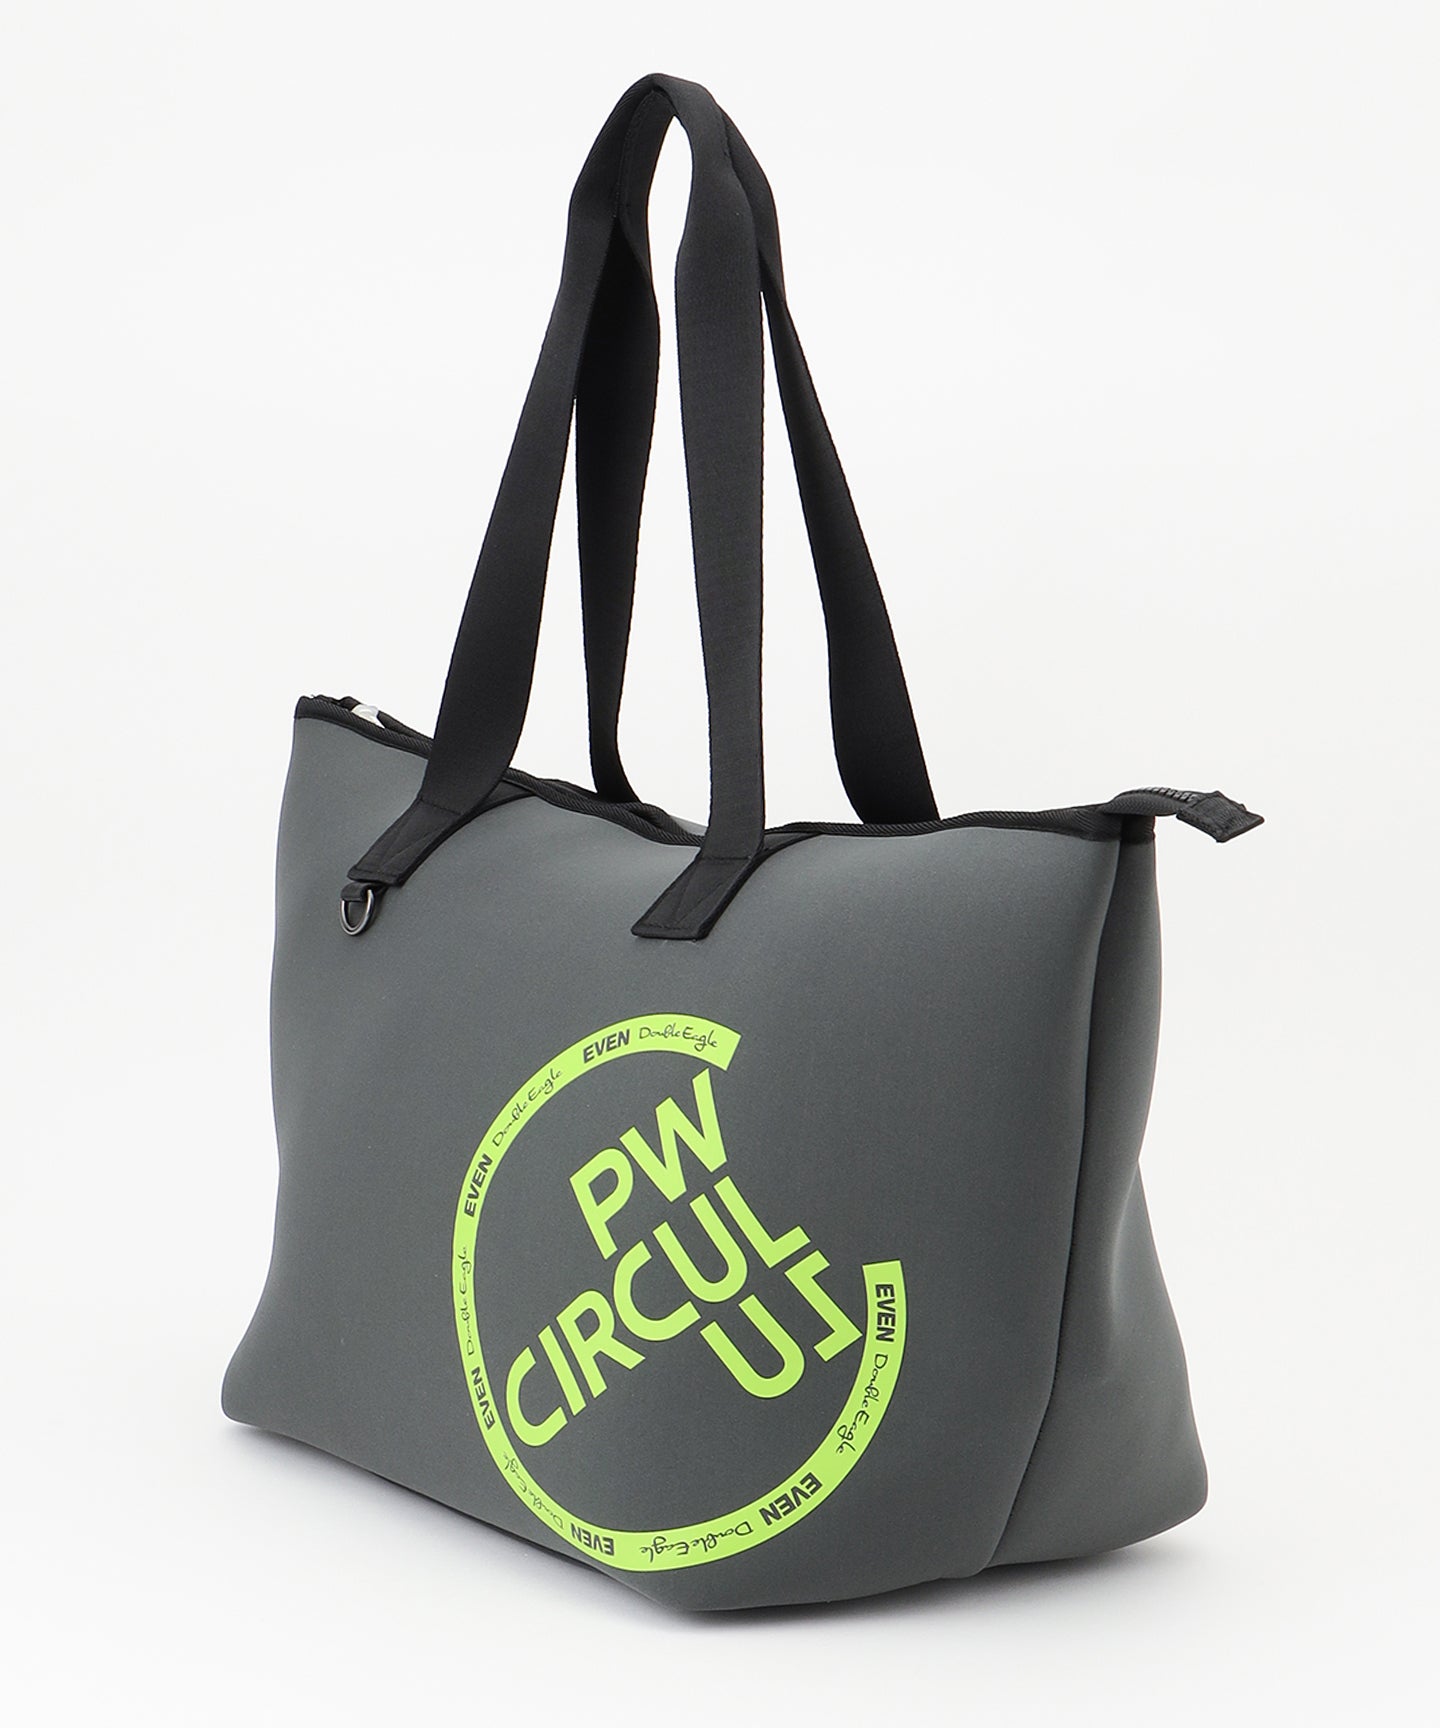 【EVEN×Double Eagle×PW CIRCULUS】SPECIAL COLLABORATION LOGO  TOTE BAG